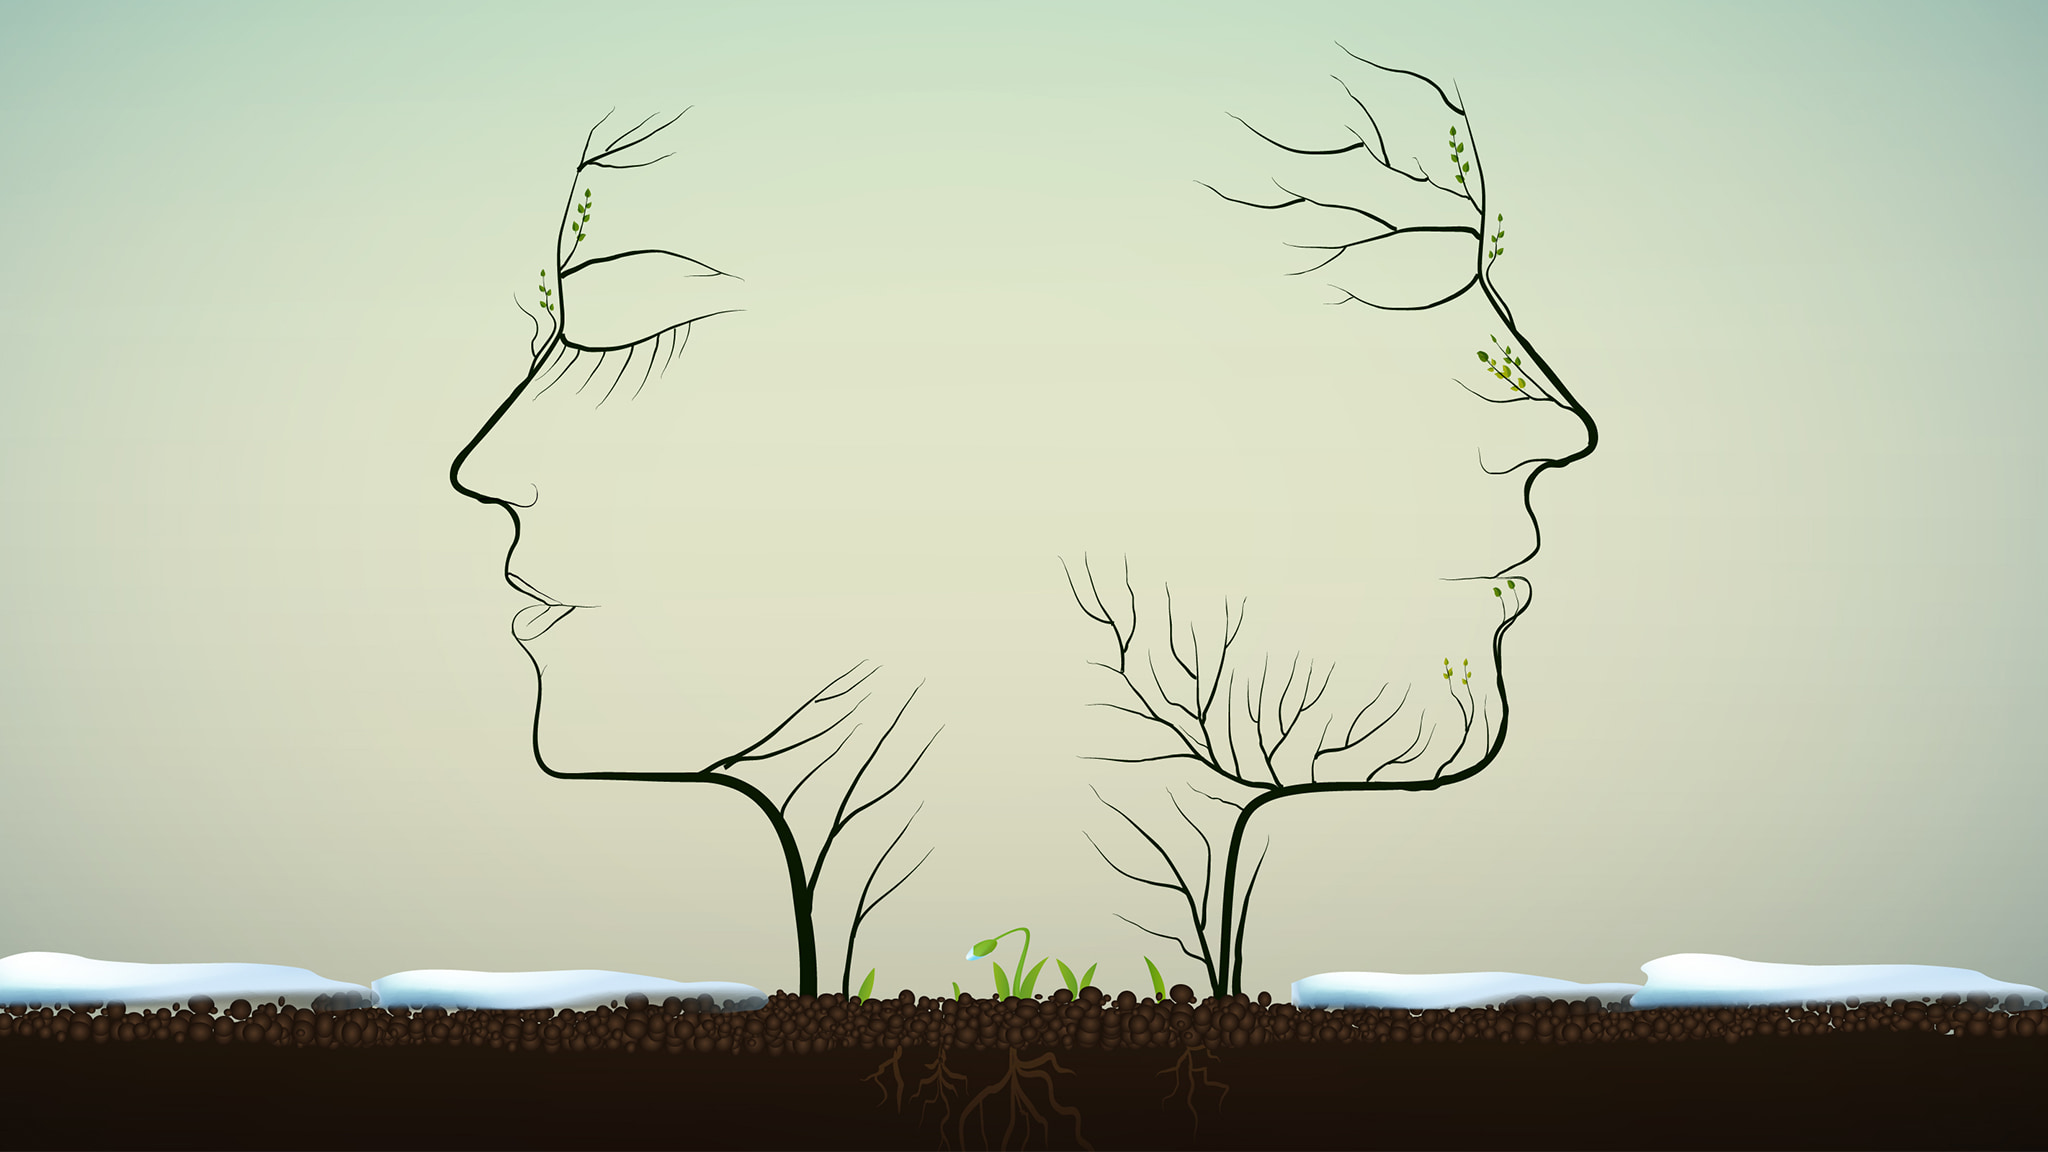 An Illustration Of Two Trees With The Branches Depicting The Faces Of A Woman And Man Facing Away From Each Other With Small Plants Growing Between Them